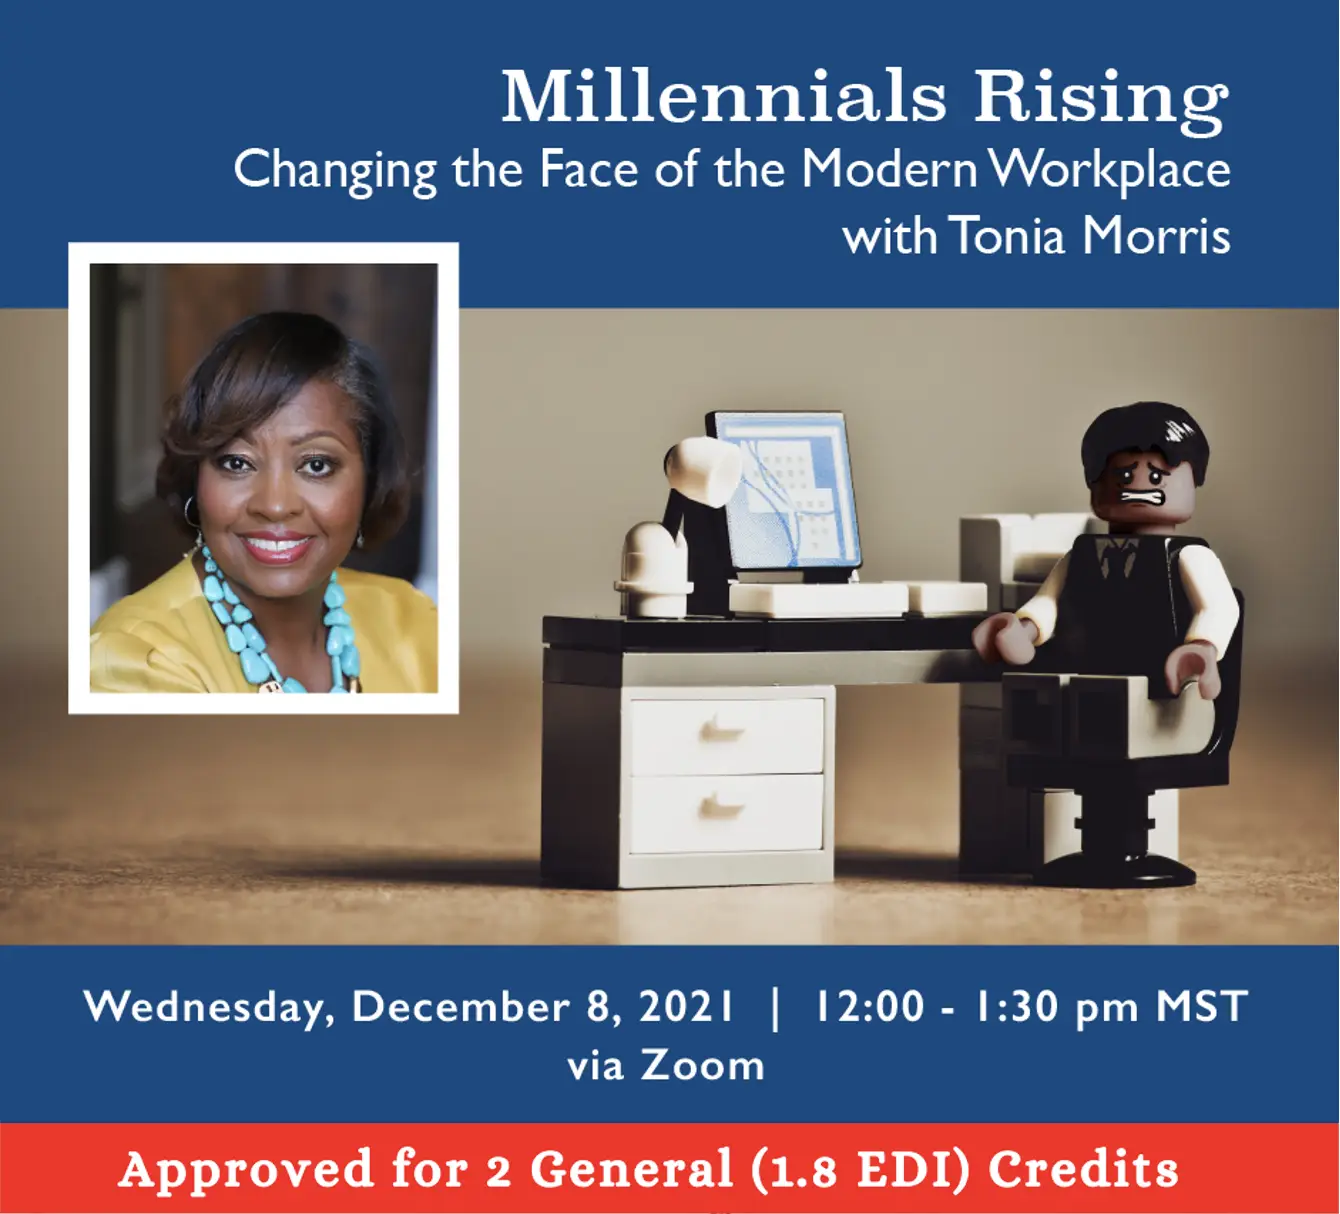 Millennials Rising: Changing the Face of the Modern Workplace with Tonia Morris